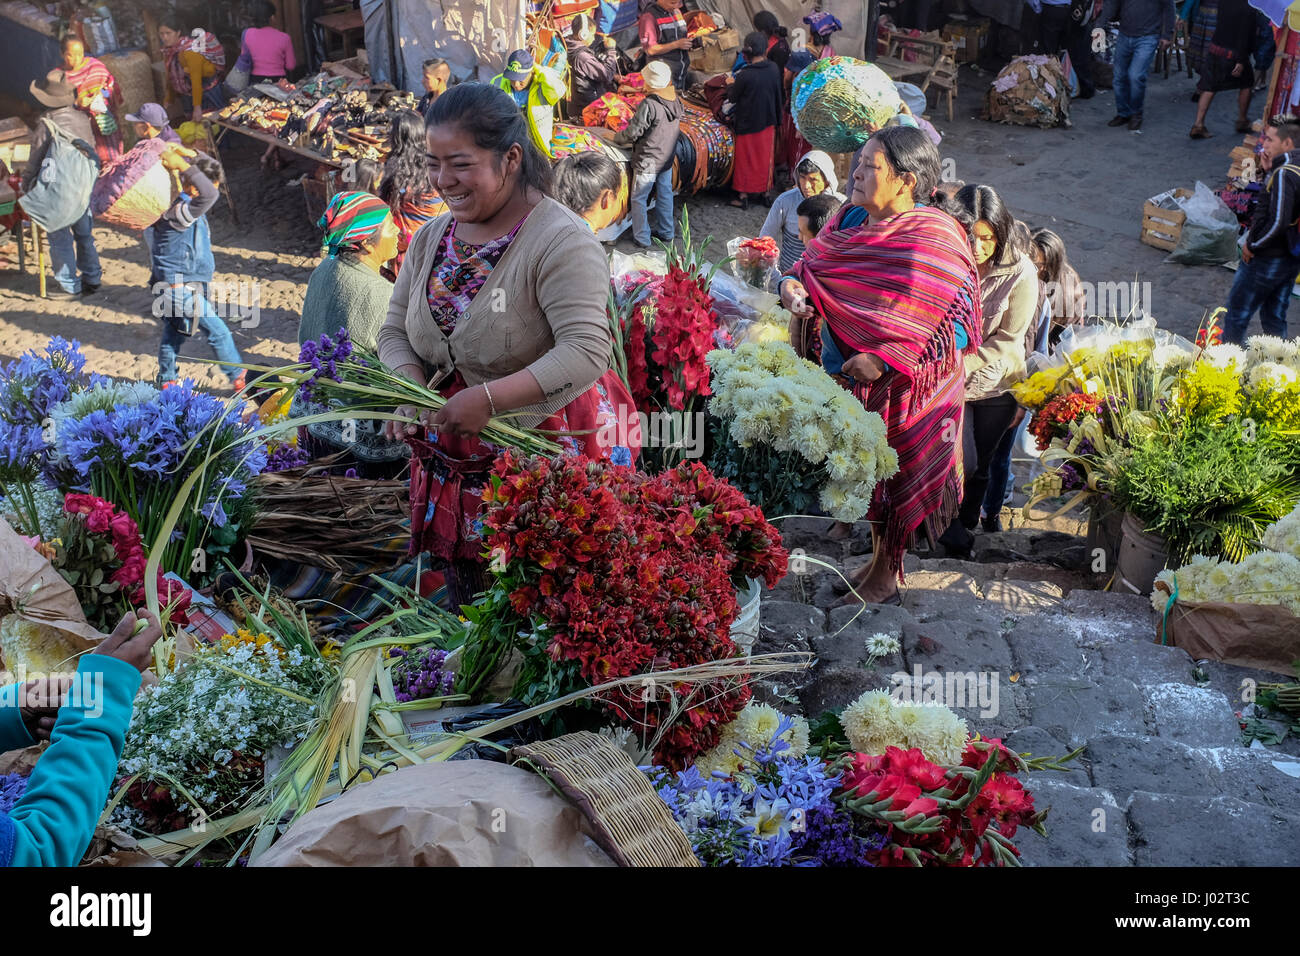 A mayan woman sells flowers in front of the church at the Sunday market in Chichicastenango, Guatemala. Stock Photo